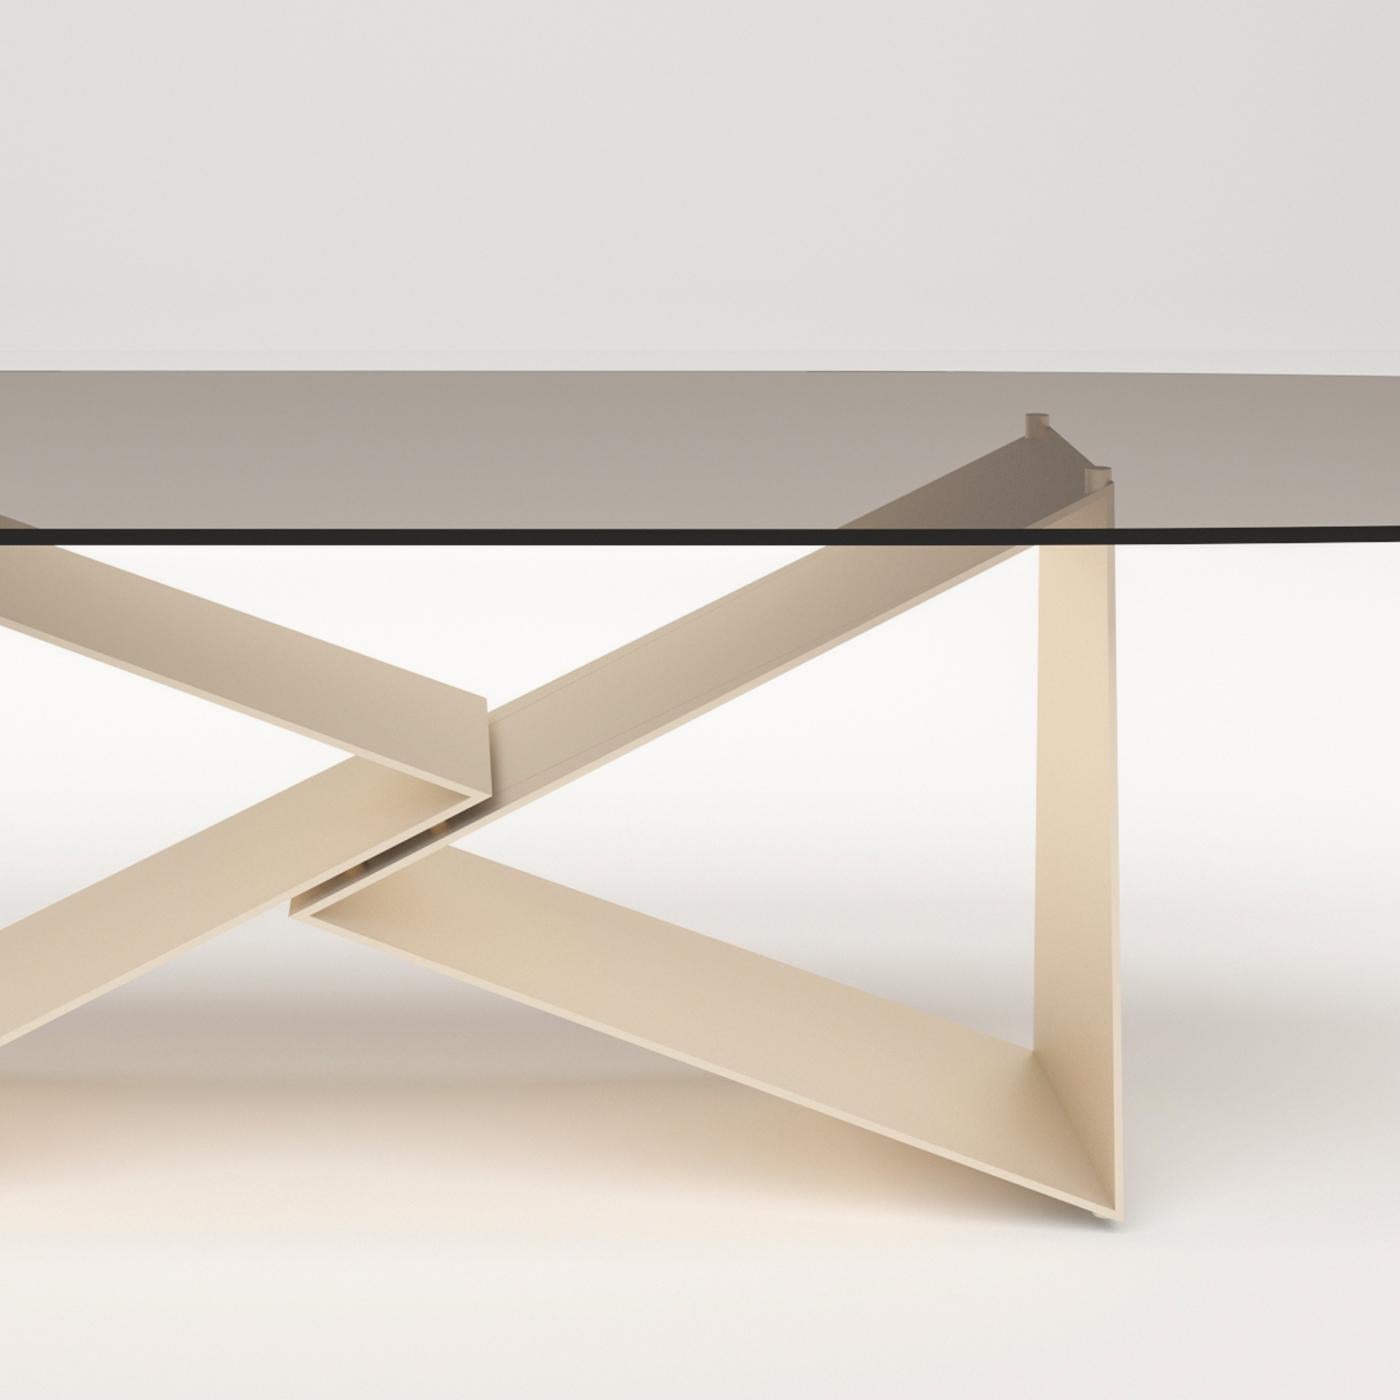 Italian Eiger Table by Andrea Lucatello